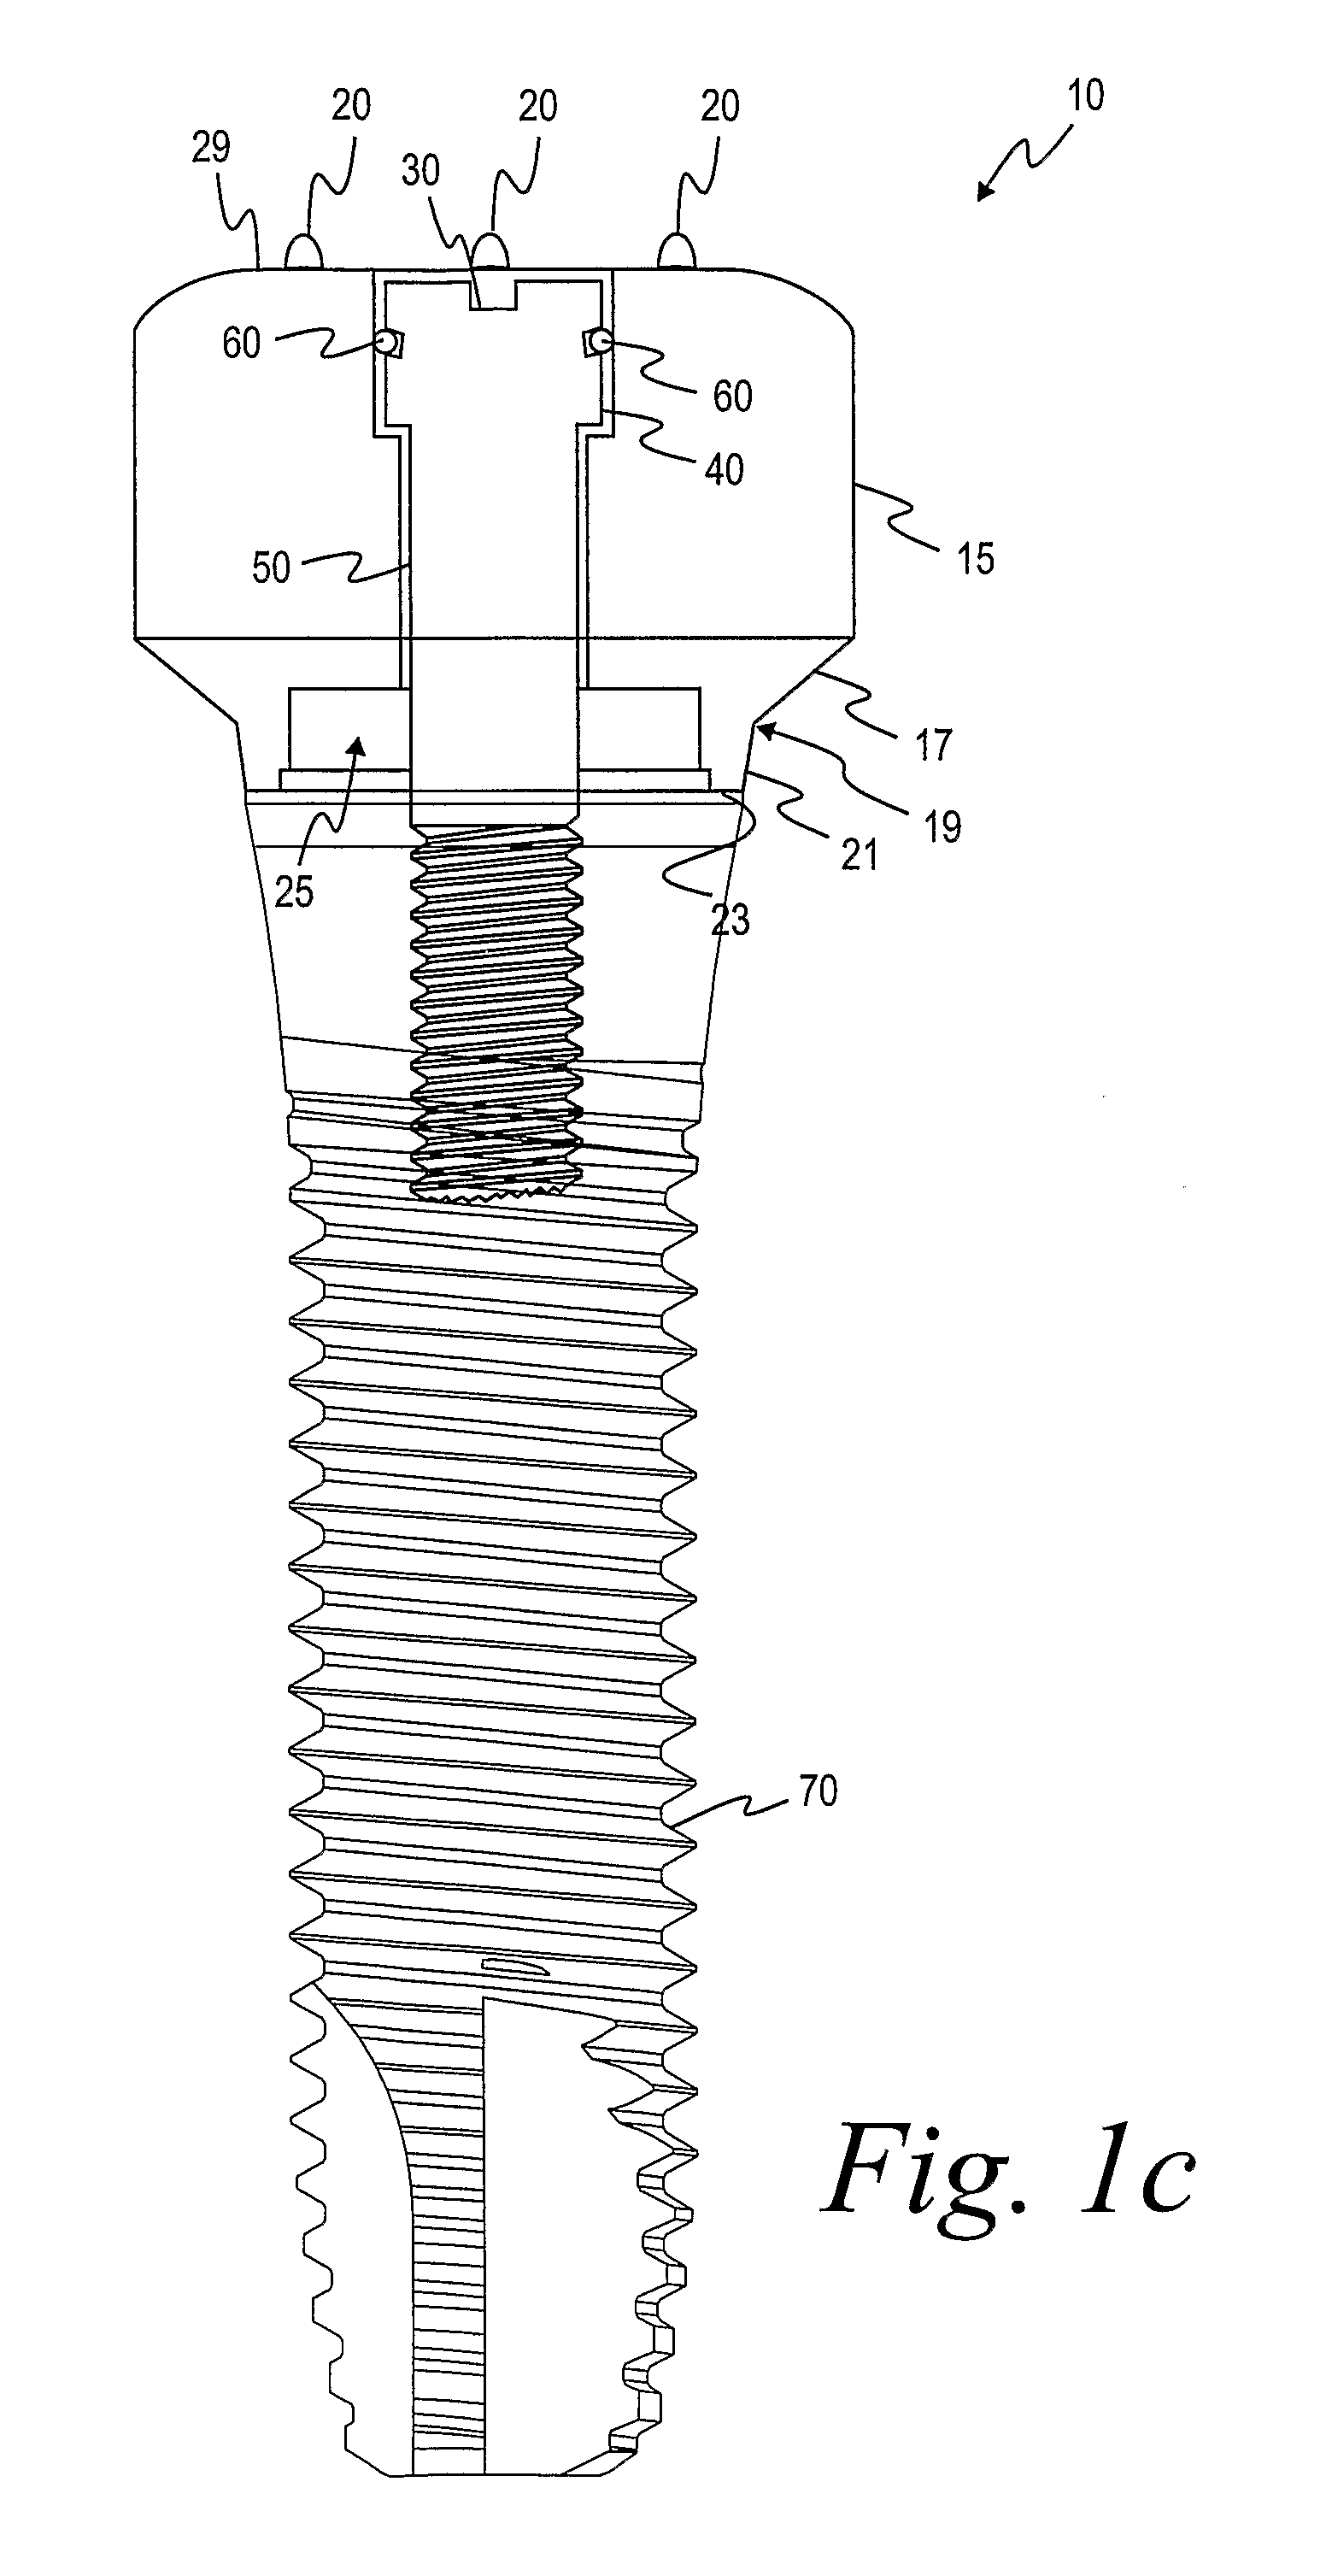 Method for manufacturing dental implant components